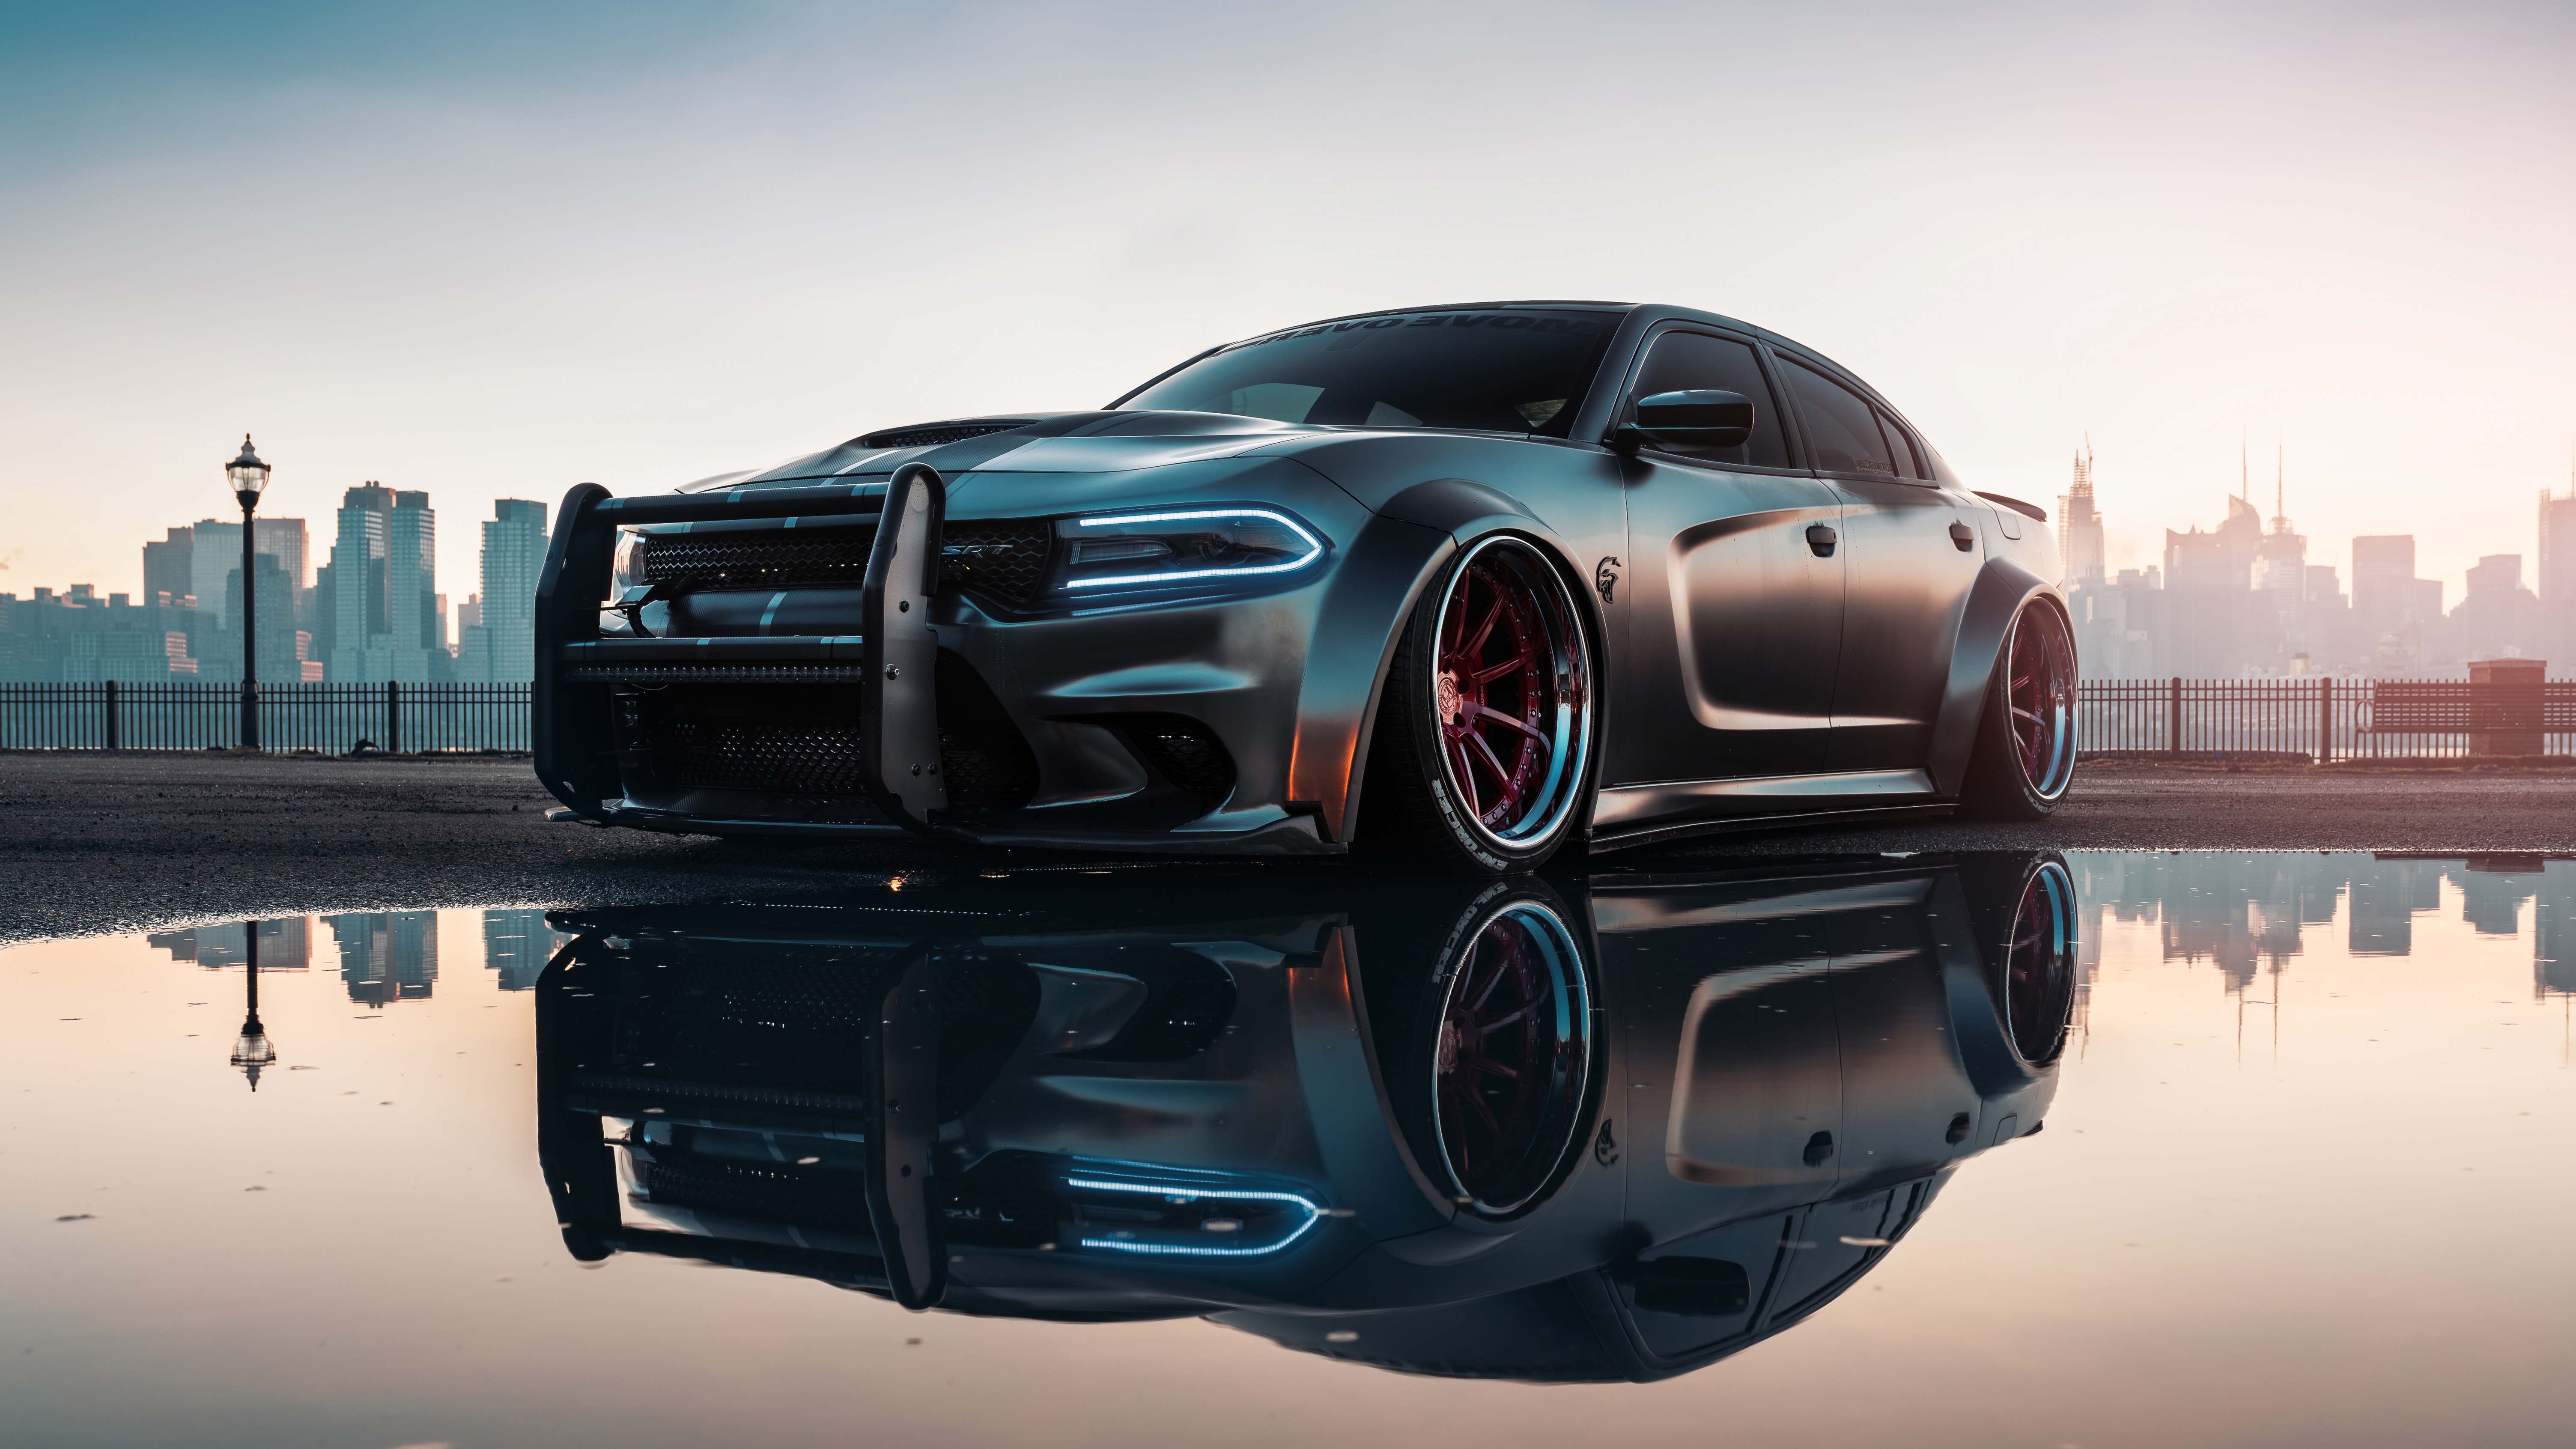 Dodge Charger Hellcat Wallpaper Discover more Charger Dodge Dodge Charger  Dodge Hellcat Dodge SRT wal  Dodge charger hellcat Dodge charger Dodge  charger srt